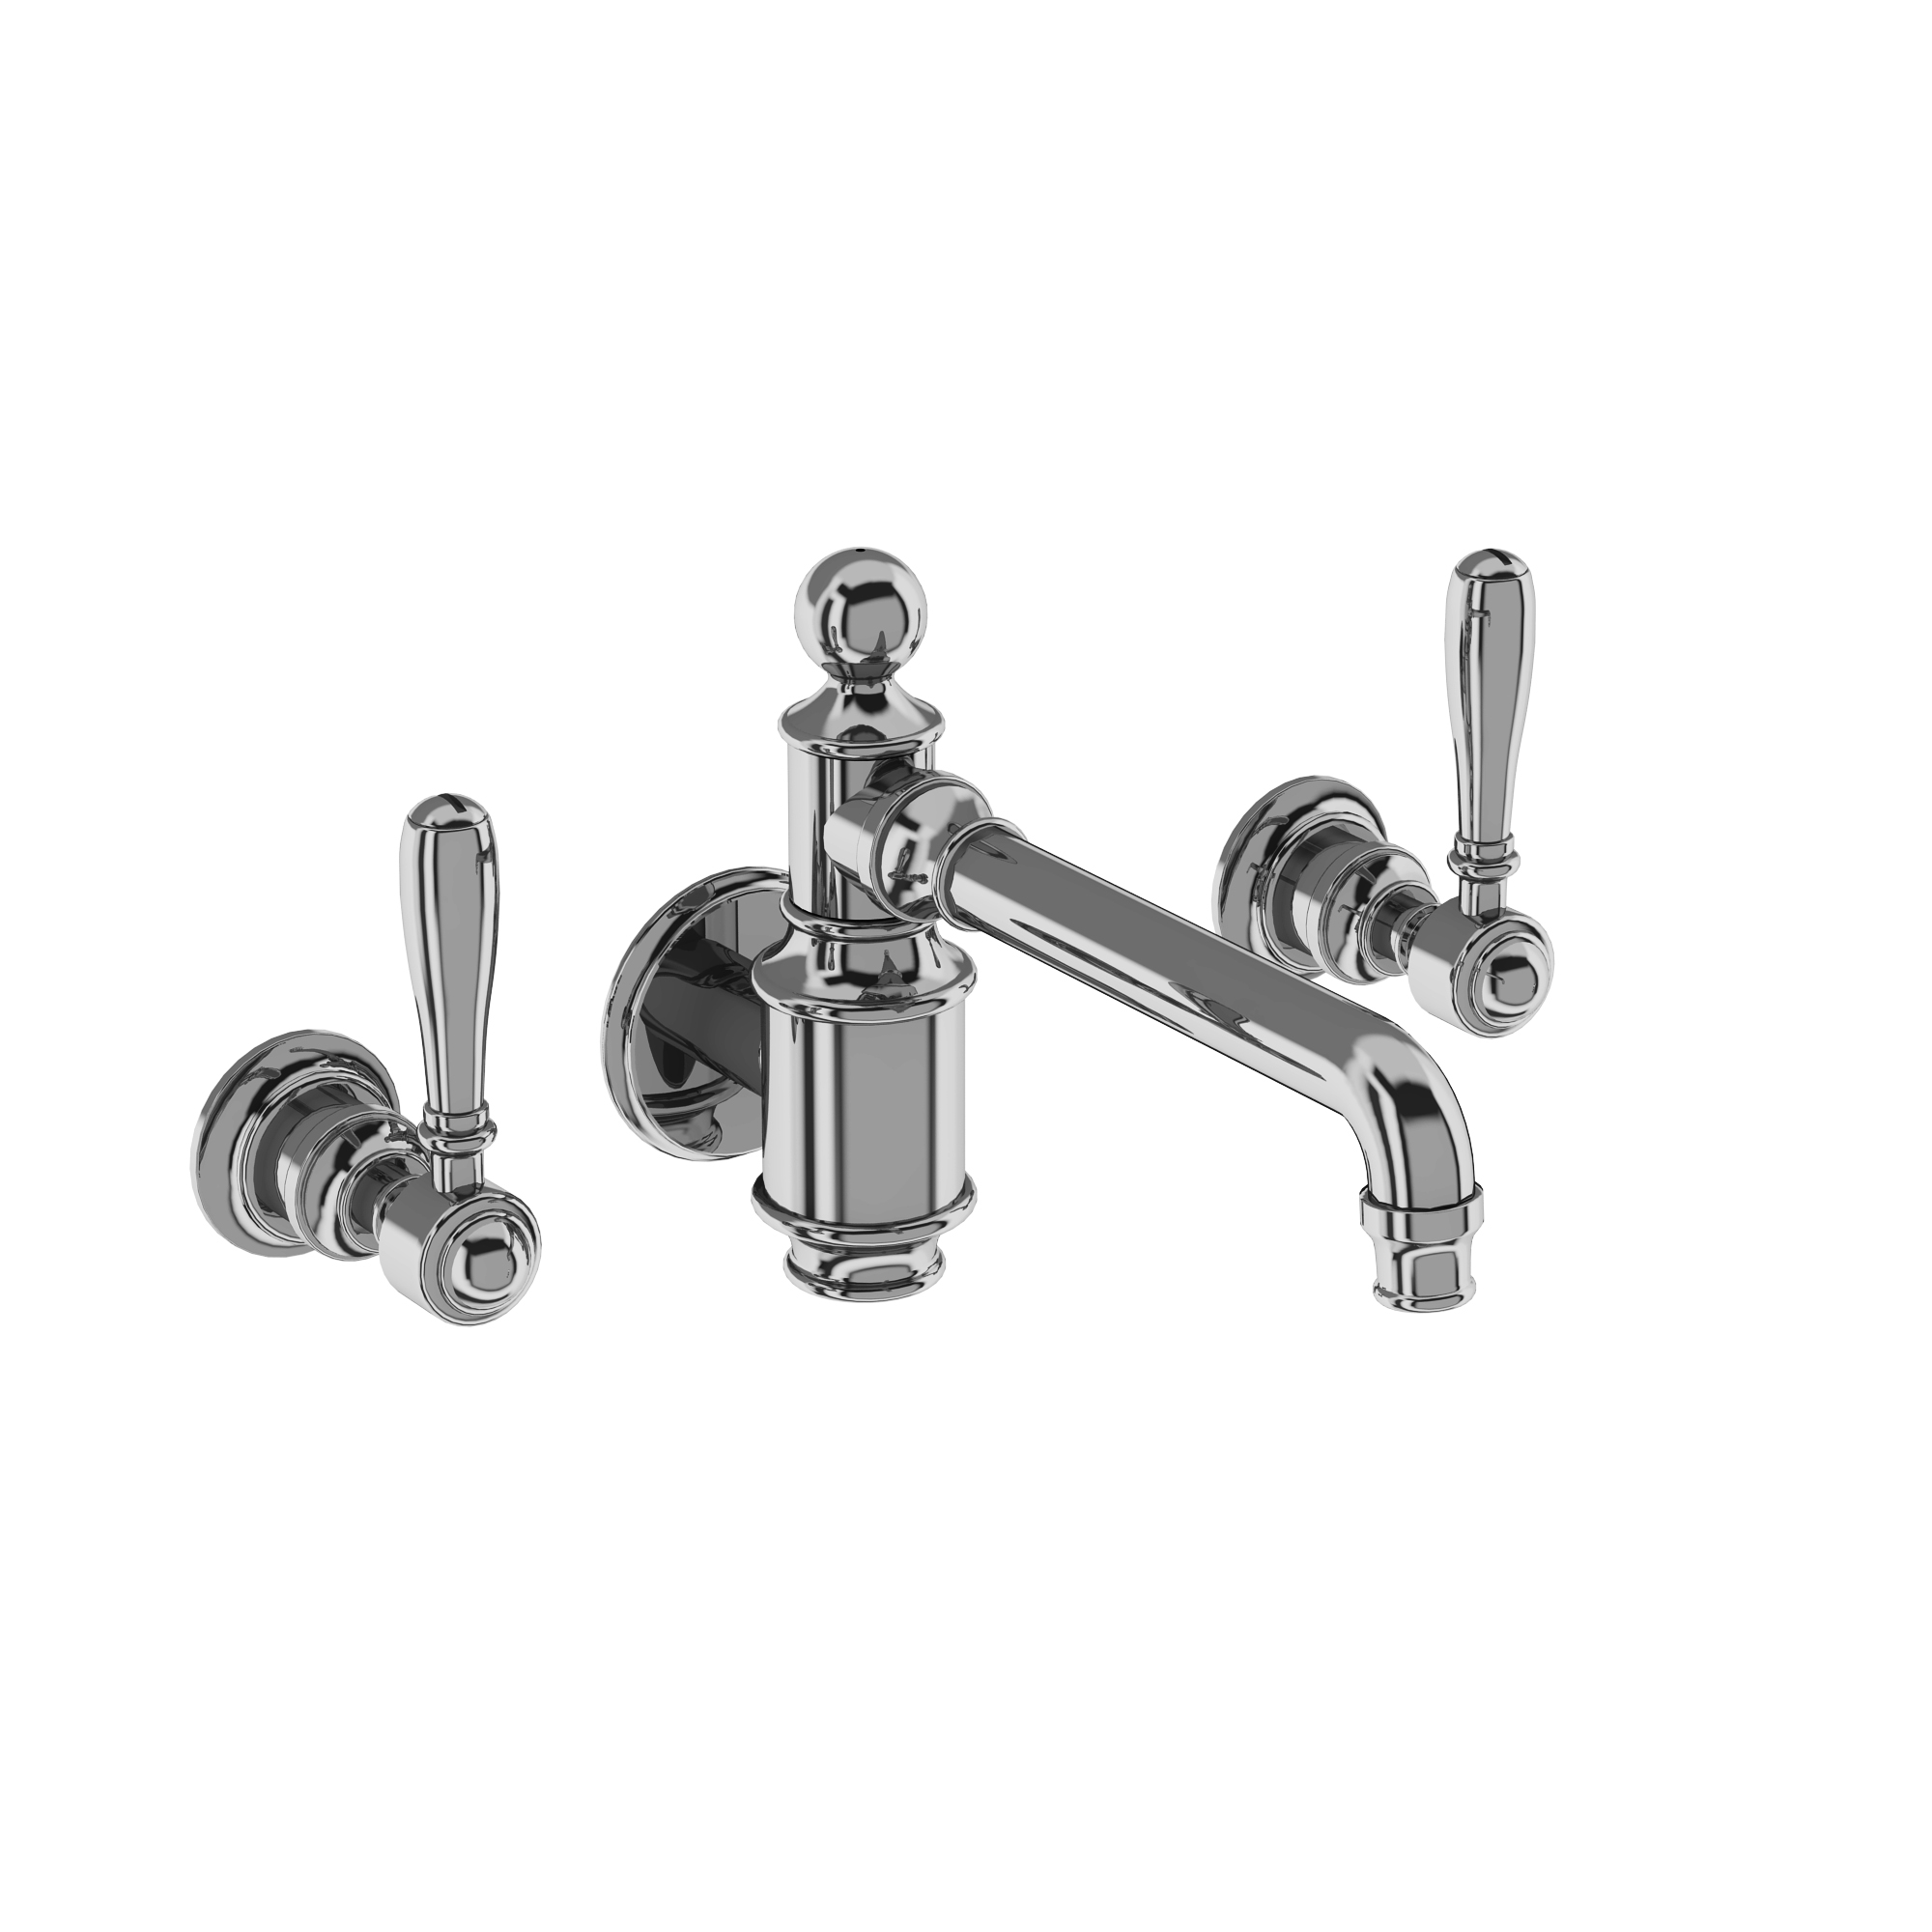 Arcade Three hole basin mixer wall-mounted without pop up waste - chrome - with brass lever